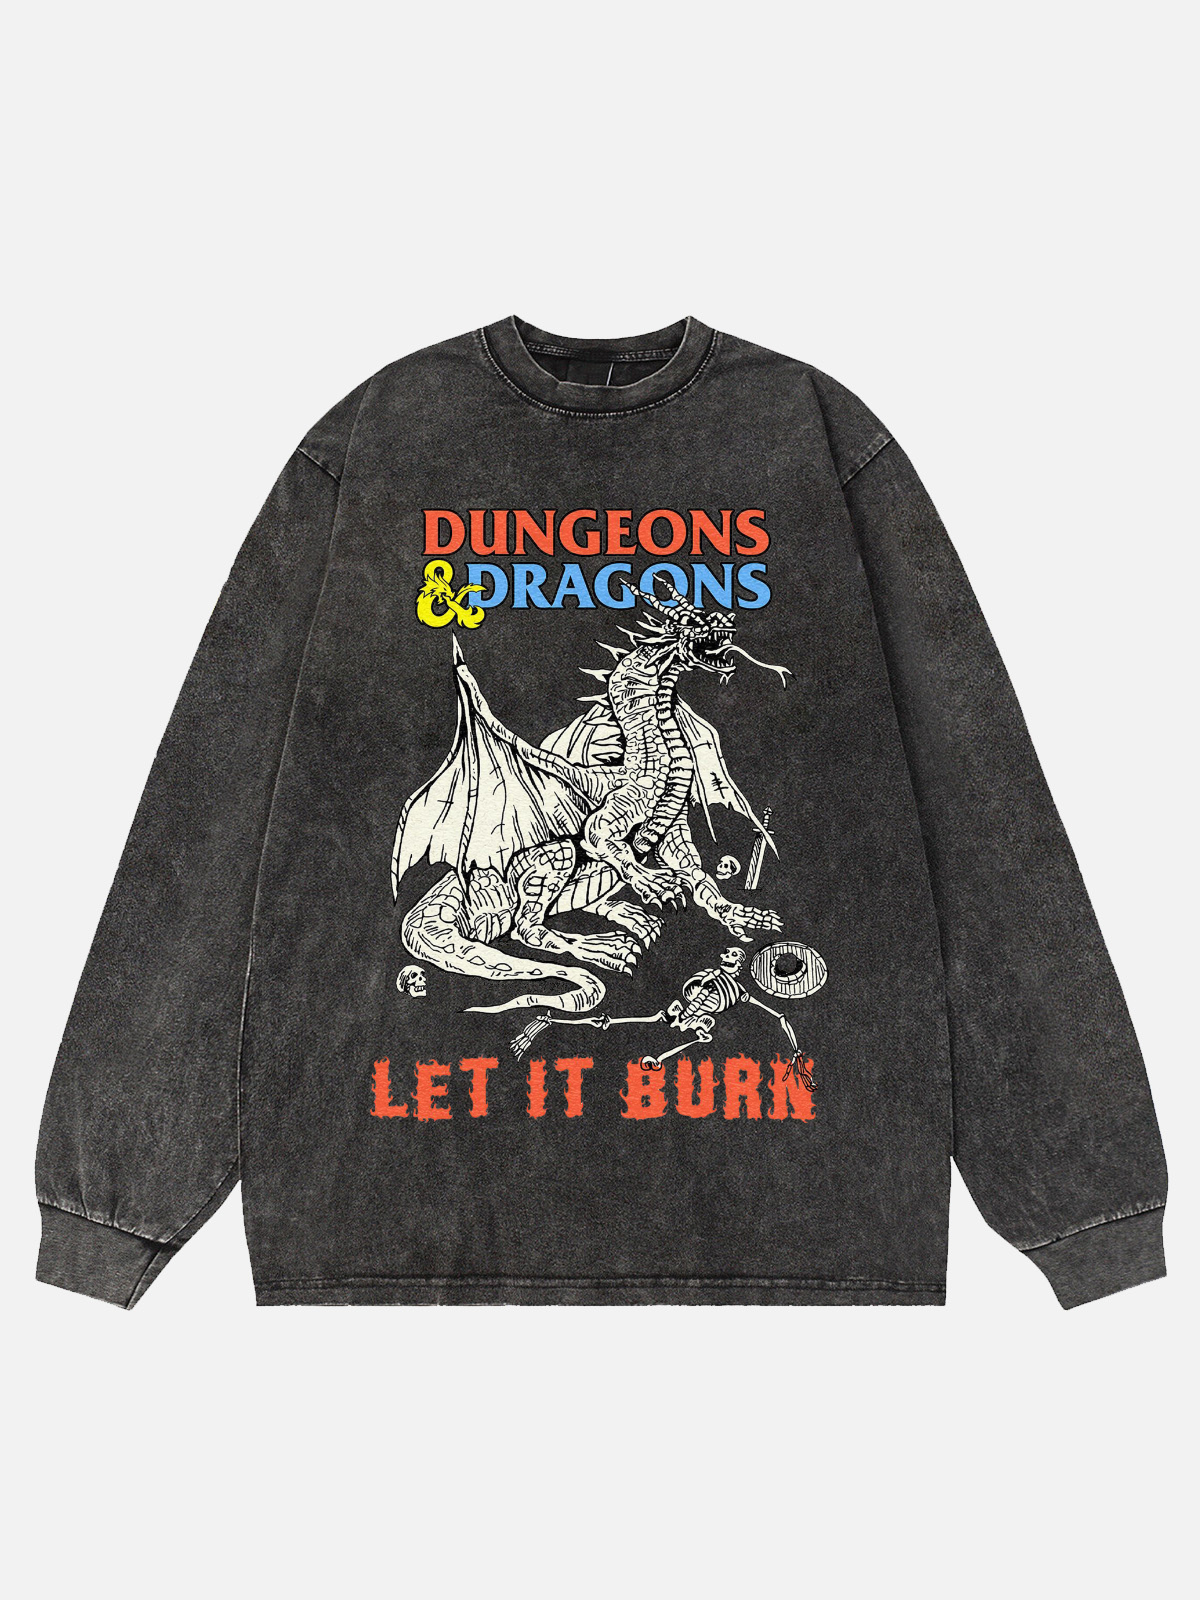 Dungeons & Dragons Let It Boil Washed Long Sleeve T-Shirt